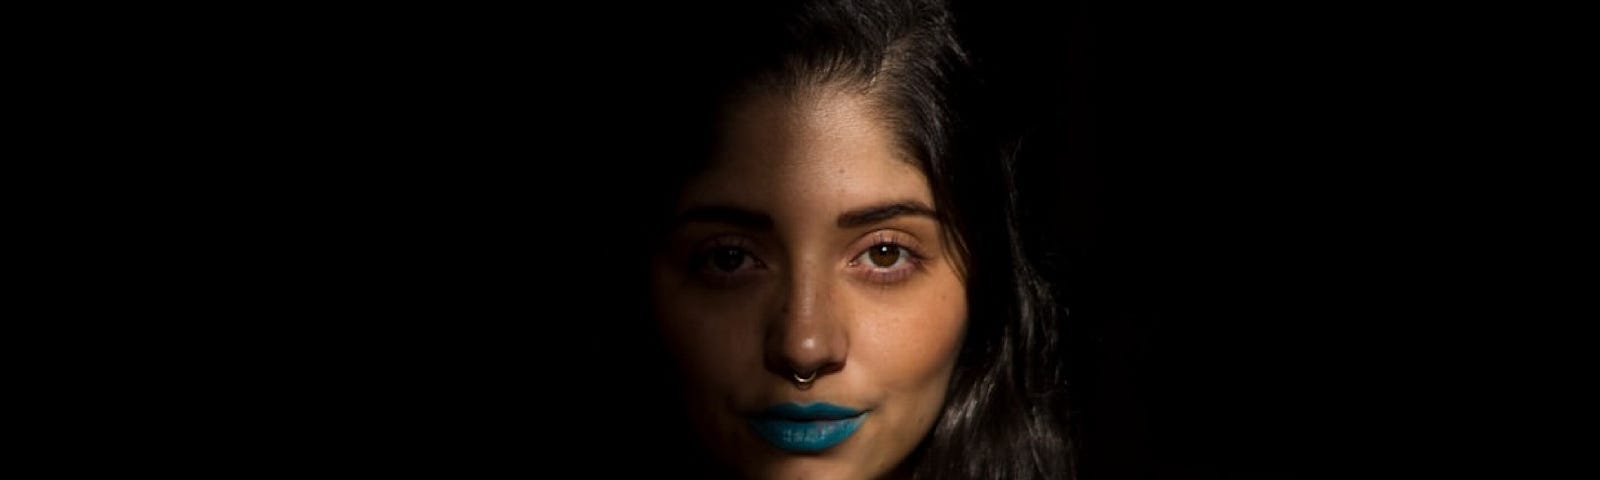 Julian Florez took this photo of a young woman with the right side of her face hidden in shadow.